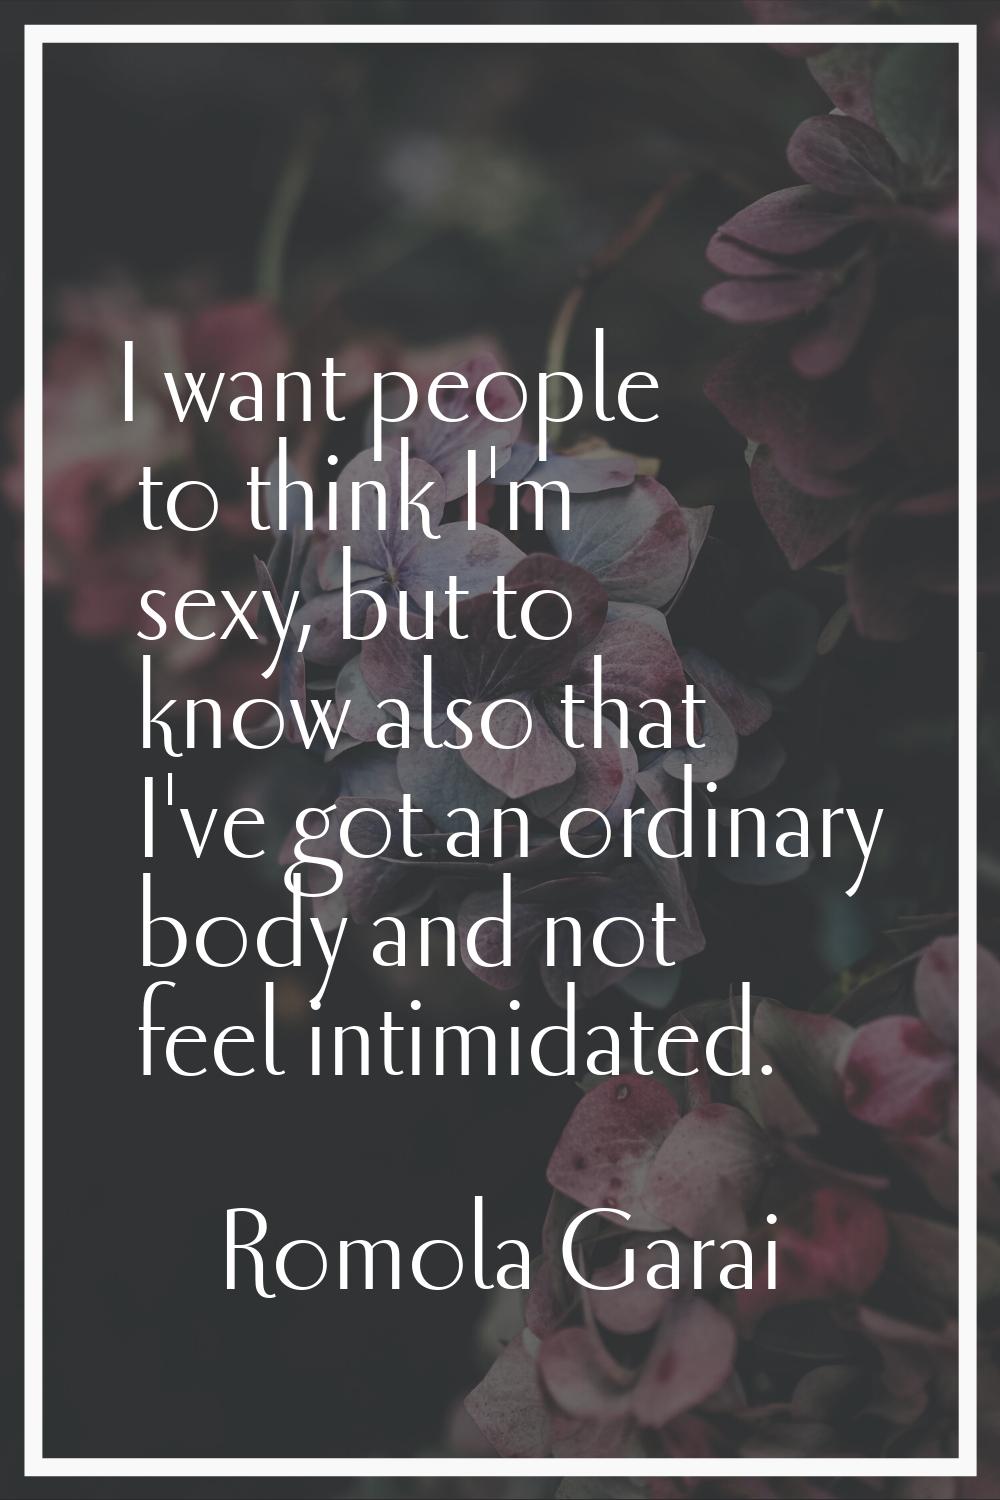 I want people to think I'm sexy, but to know also that I've got an ordinary body and not feel intim